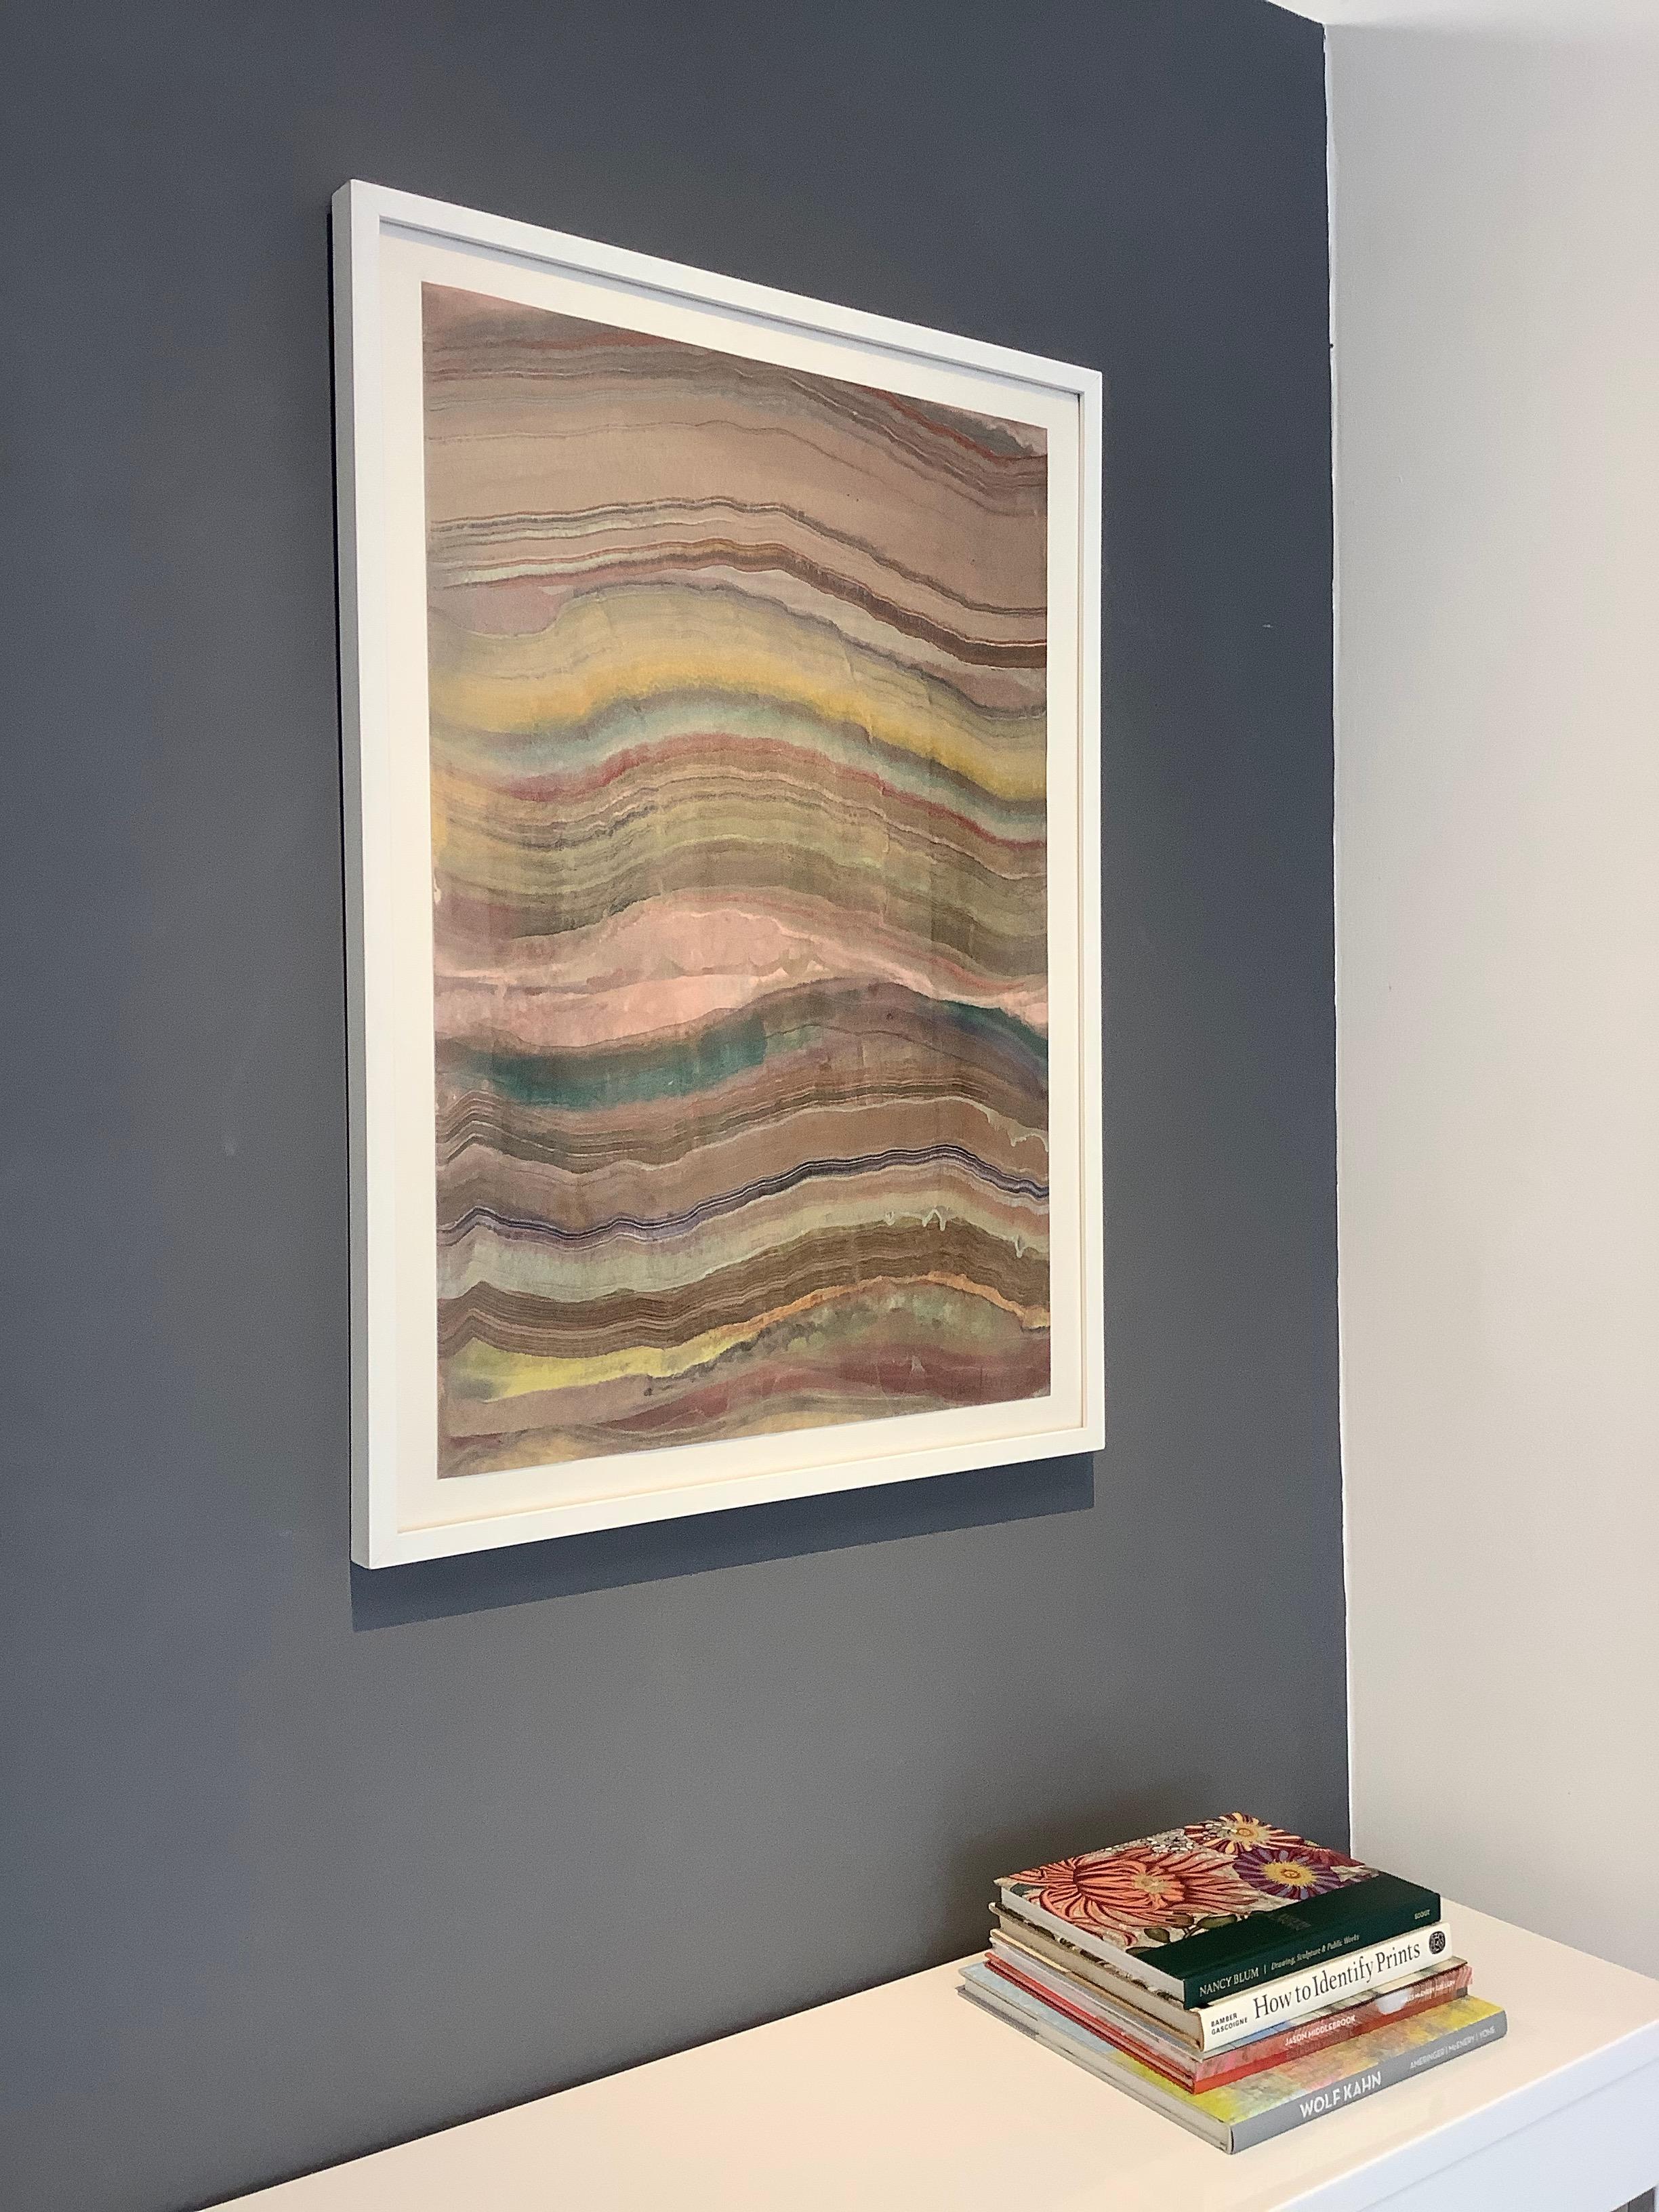 An abstract, multicolored encaustic monotype on paper with layers of pigmented beeswax on lightweight Japanese Masa paper create an undulating composition in brown earth tones suggesting layers of the earth's crust and geological formations with